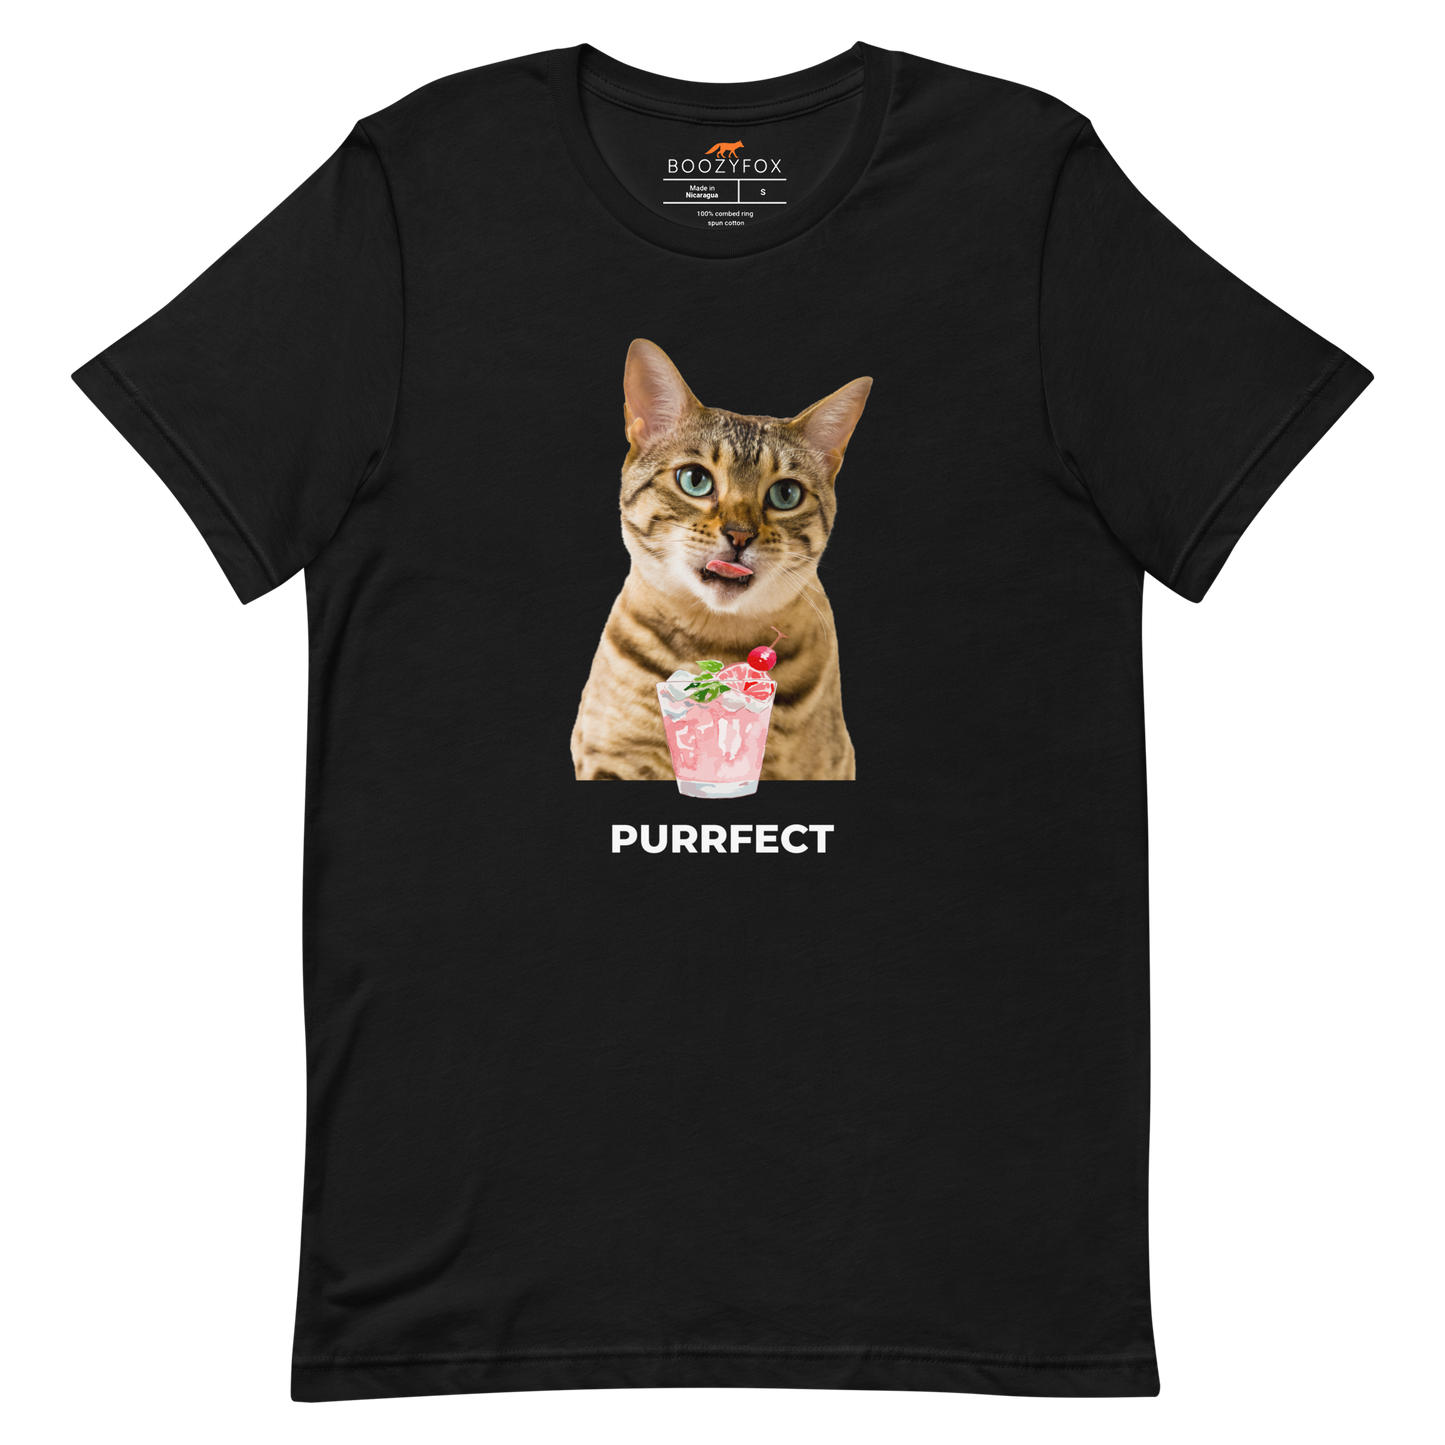 Black Premium Cat T-Shirt featuring a Purrfect graphic on the chest - Funny Graphic Cat Tees - Boozy Fox